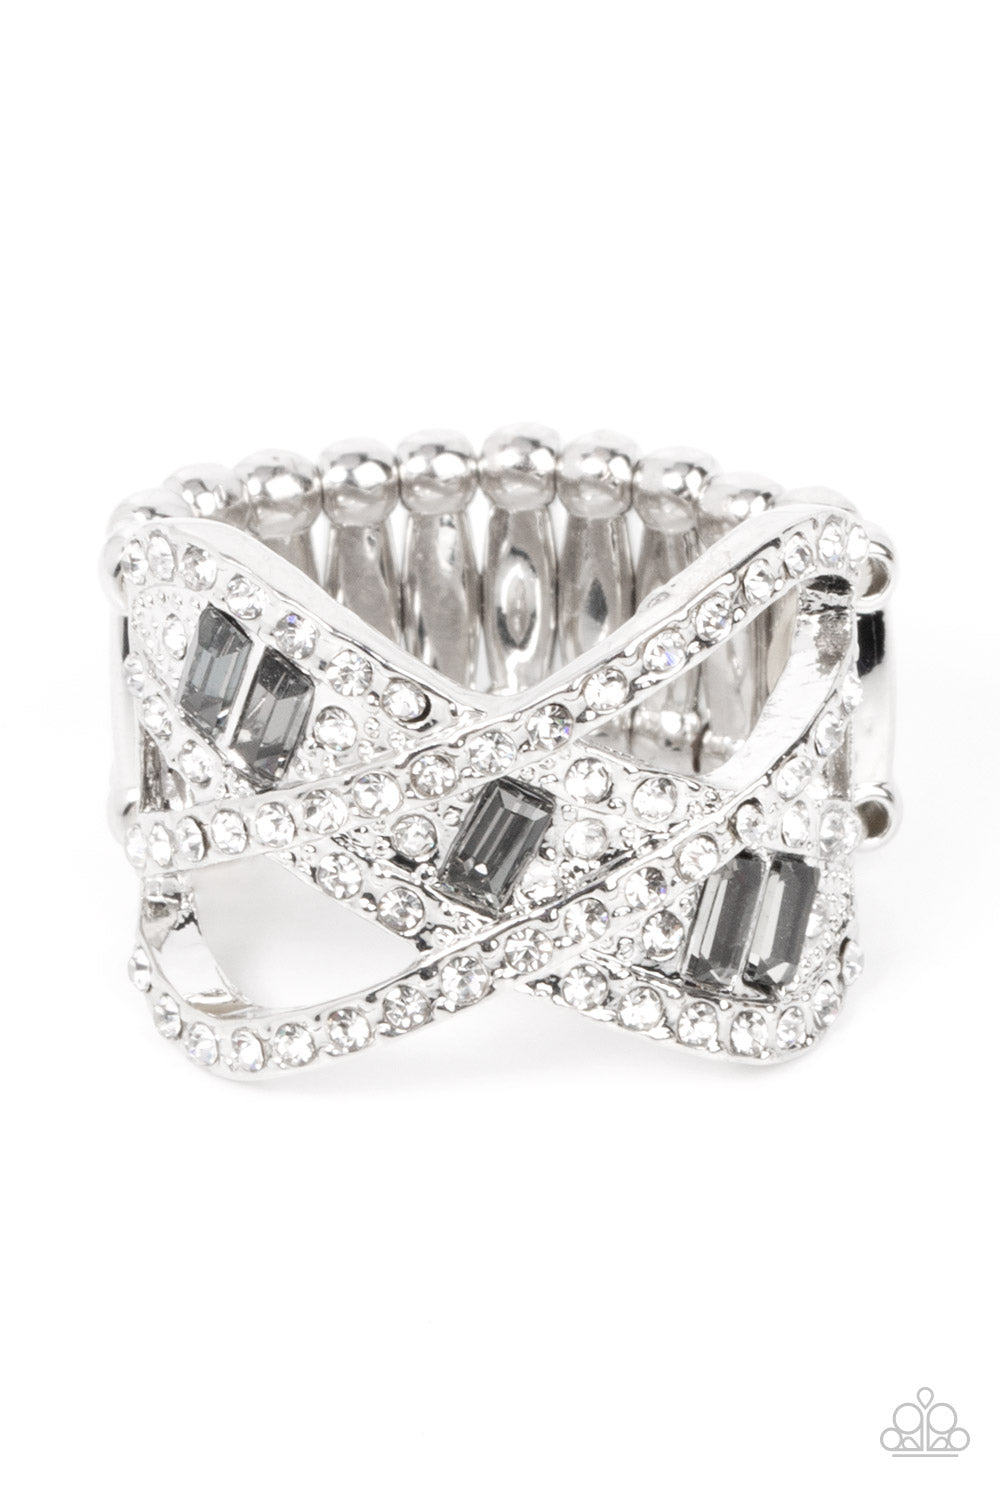 Triple Threat Twinkle - silver - Paparazzi ring – JewelryBlingThing